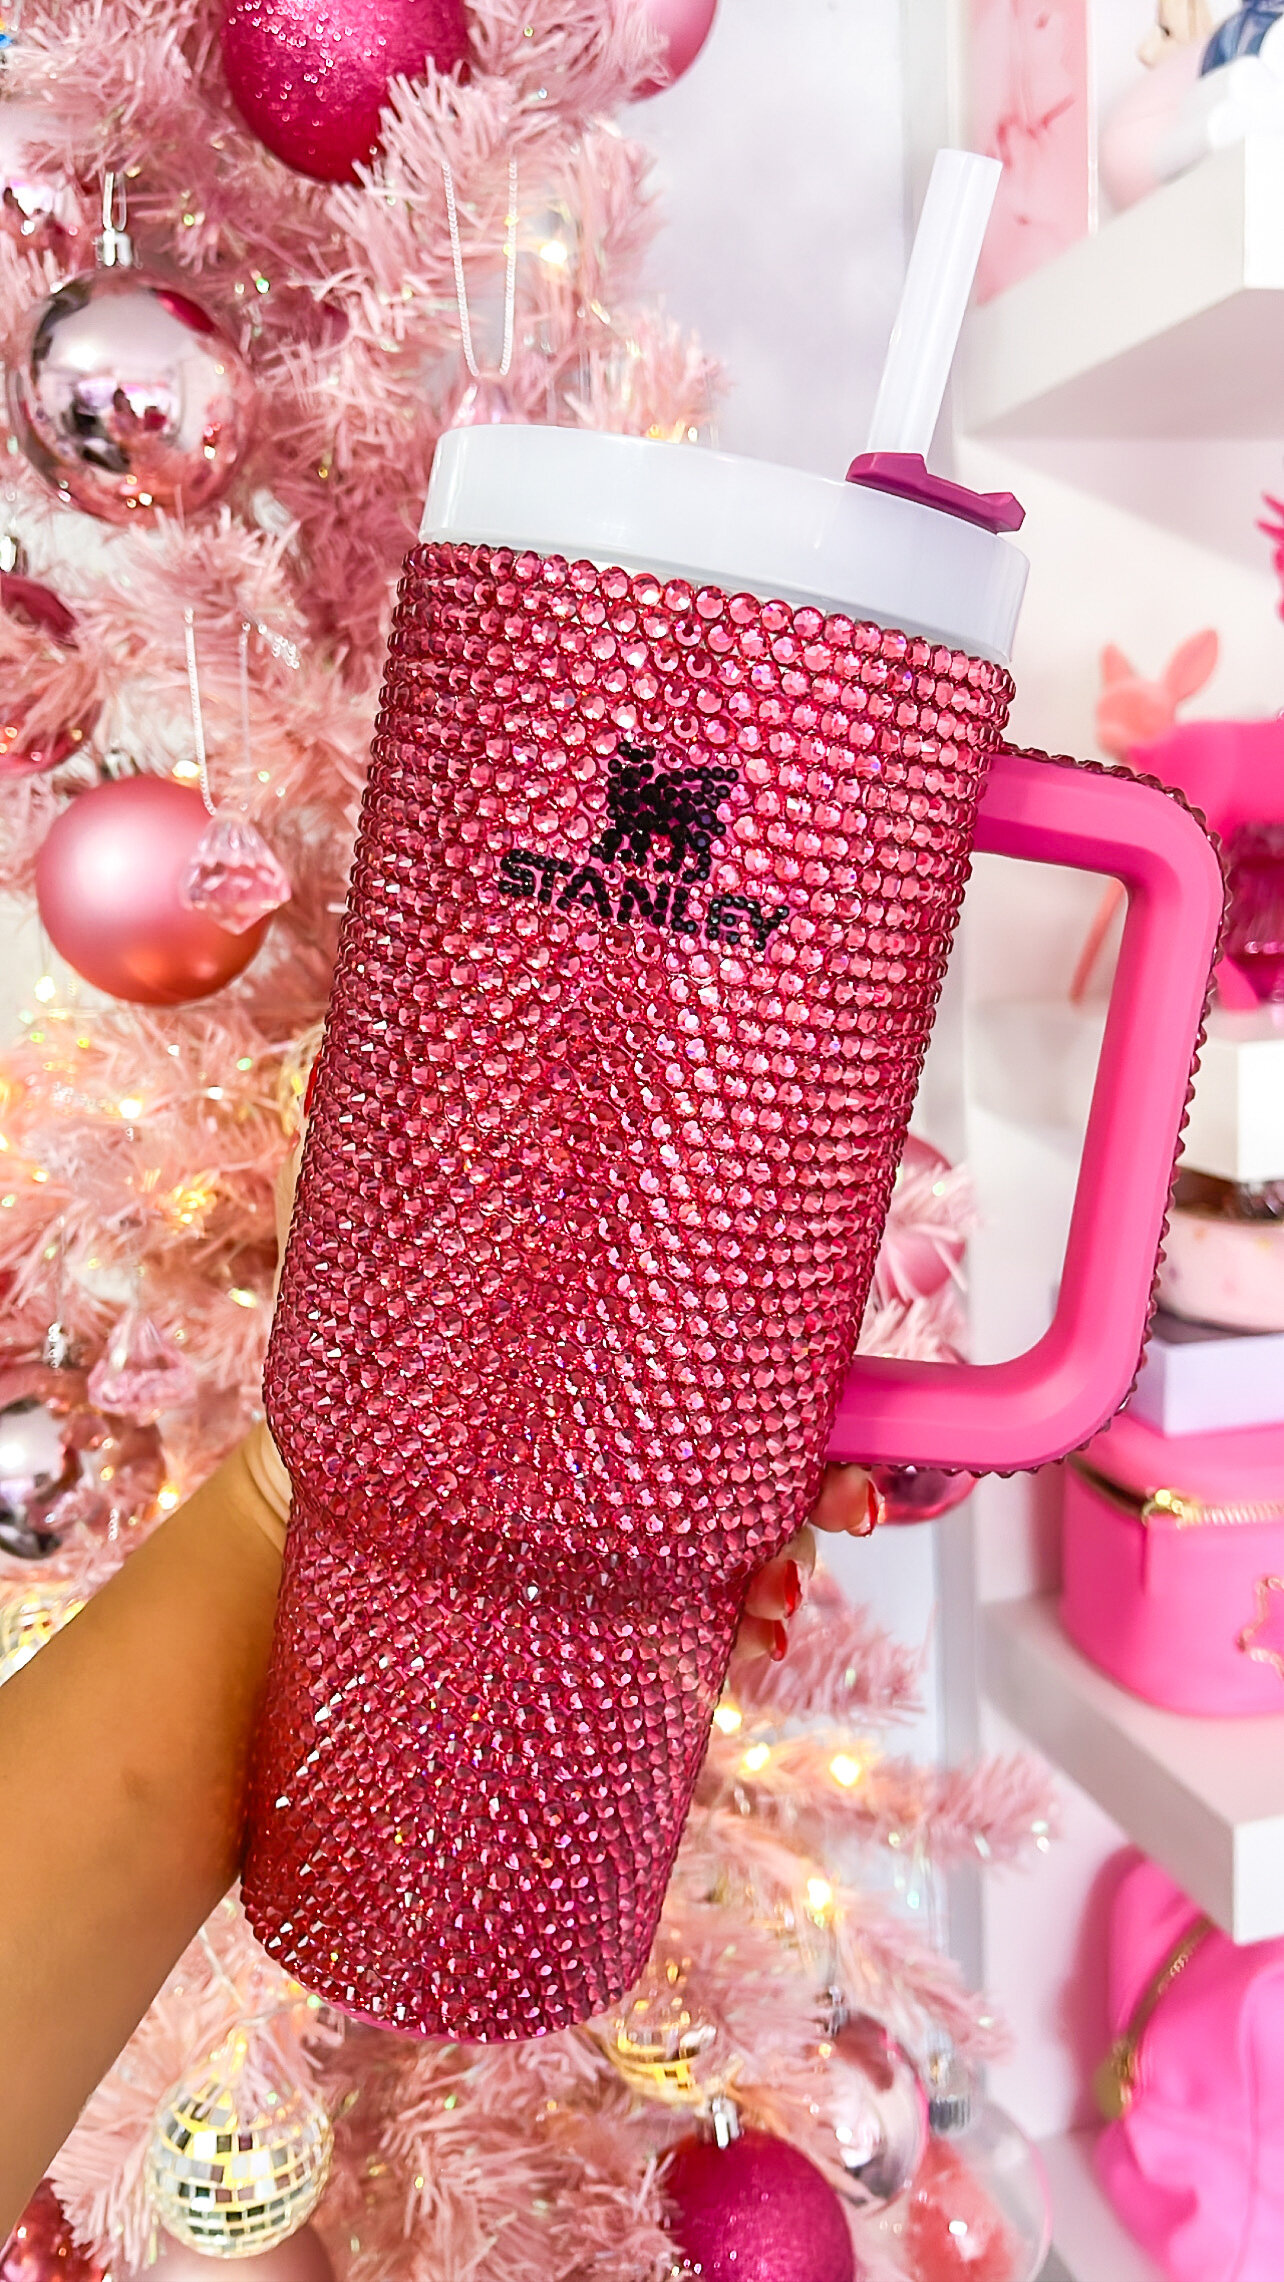 Pink, White, and Silver Milkyway Stanley Tumbler MADE TO ORDER 